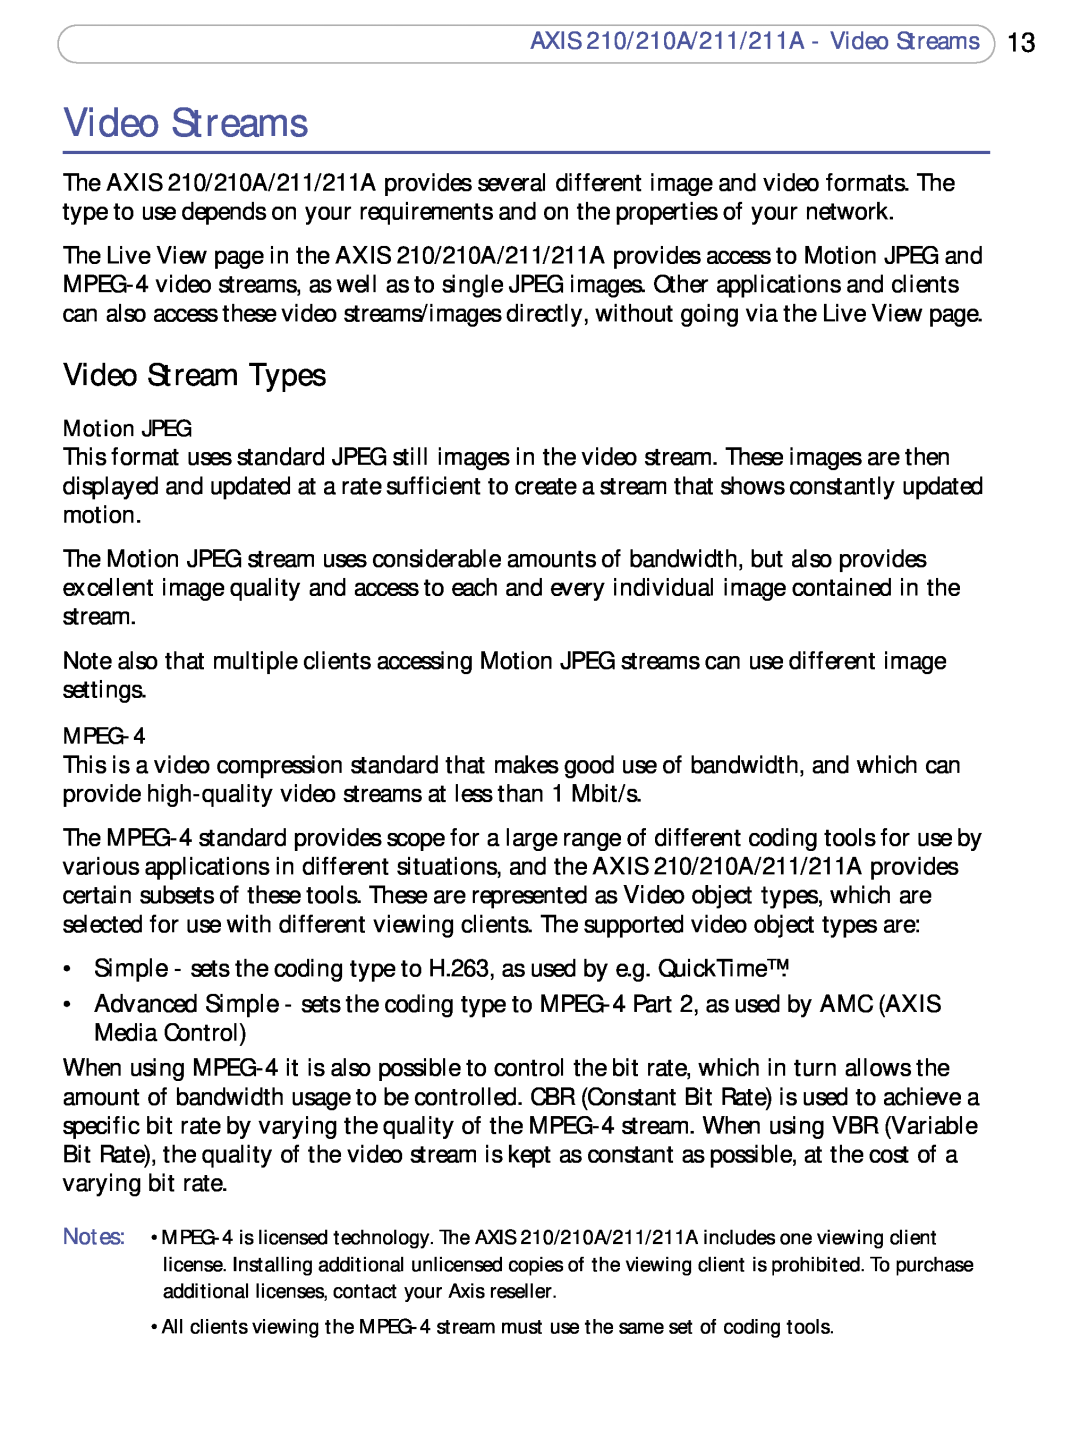 Axis Communications 211a user manual Video Stream Types, AXIS 210/210A/211/211A - Video Streams, Motion JPEG, MPEG-4 